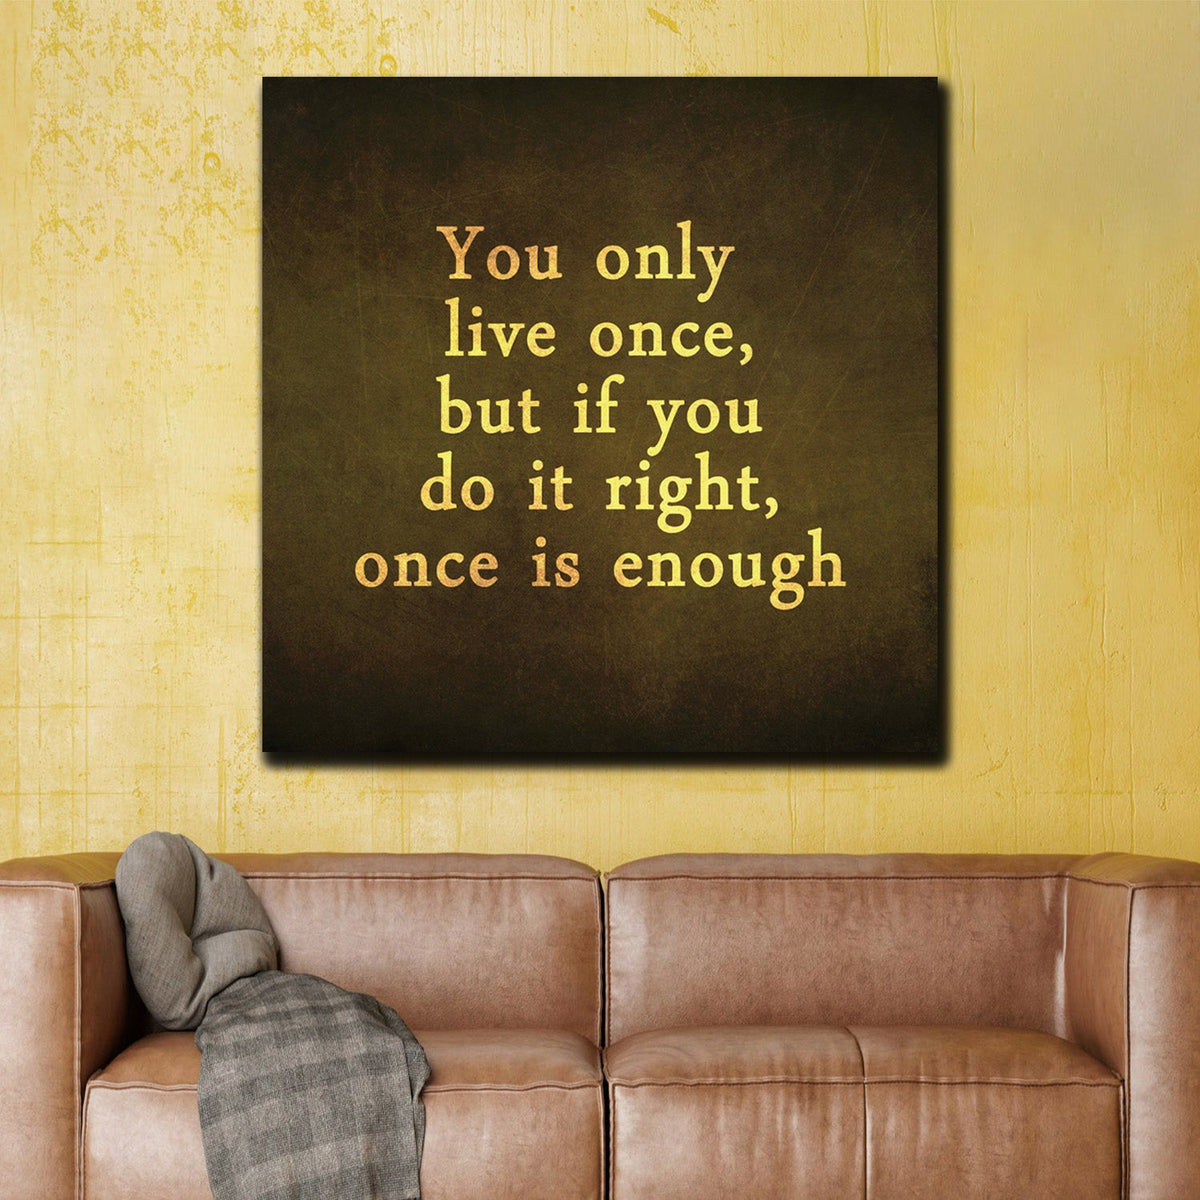 https://cdn.shopify.com/s/files/1/0387/9986/8044/products/YouOnlyLiveOnceCanvasArtprintStretched-4.jpg